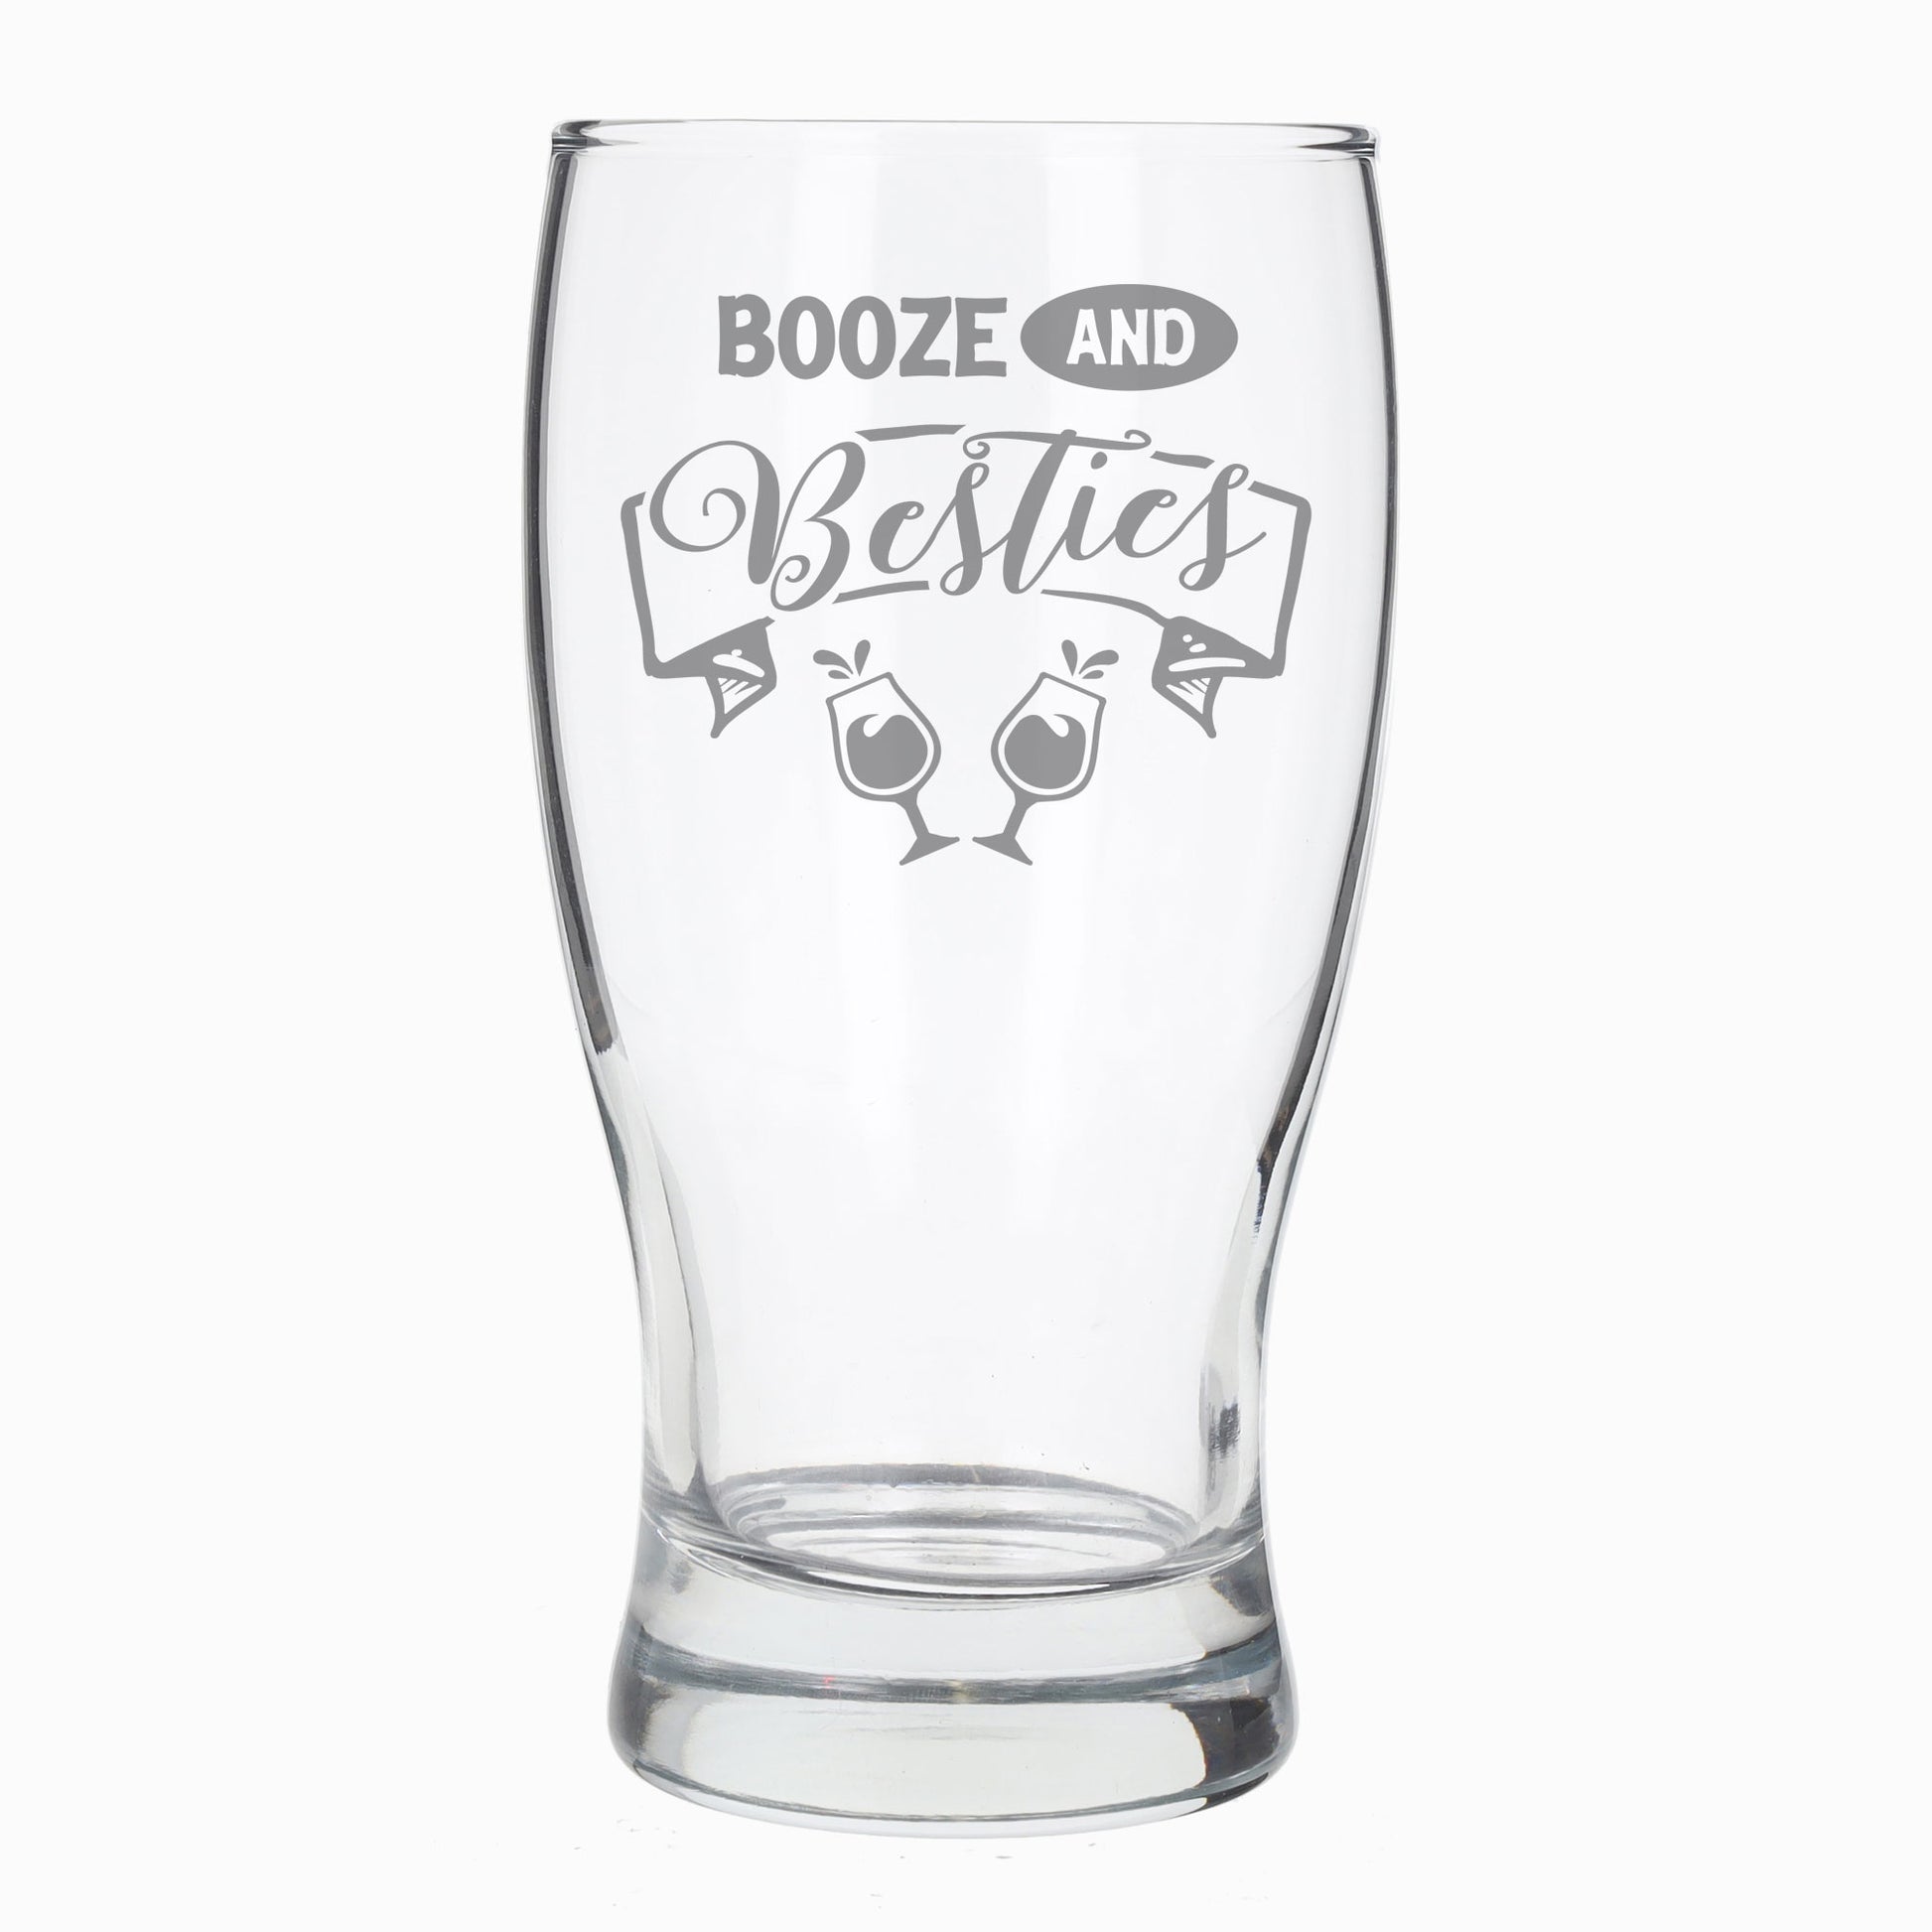 Booze and Besties Engraved Beer Pint Glass and/or Coaster Set  - Always Looking Good - Beer Glass Only  